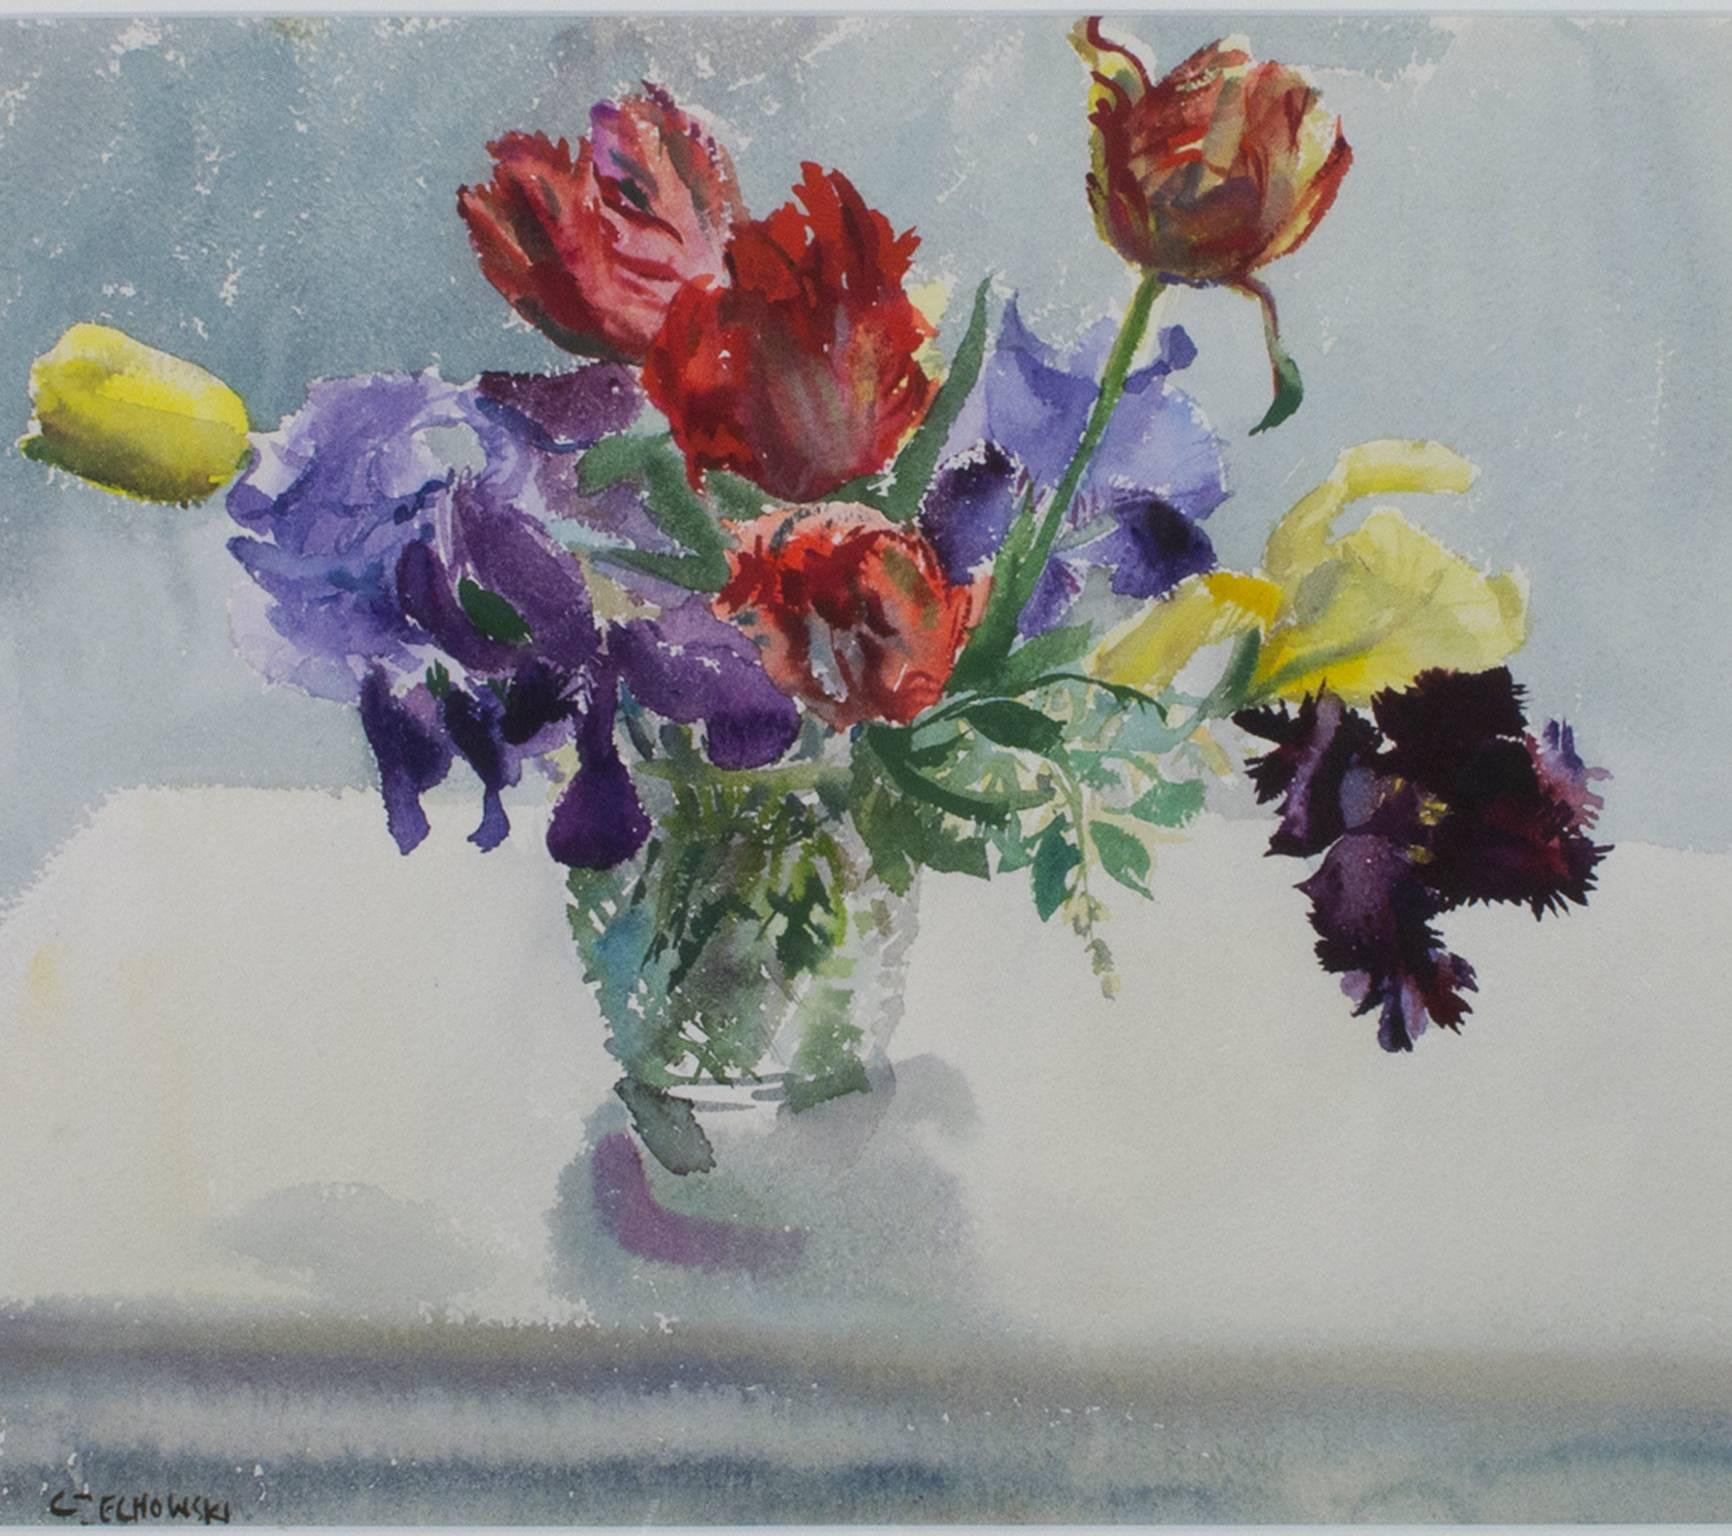 "Vase of Parrot Tulips & Irises" is an original watercolor painting by Alicia Czechowski, who signed the piece in the lower left. This piece includes flowers in red, purple, and yellow. 

14" x 16" art
21 1/2" x 23 7/8" frame

Alicia Czechowski,